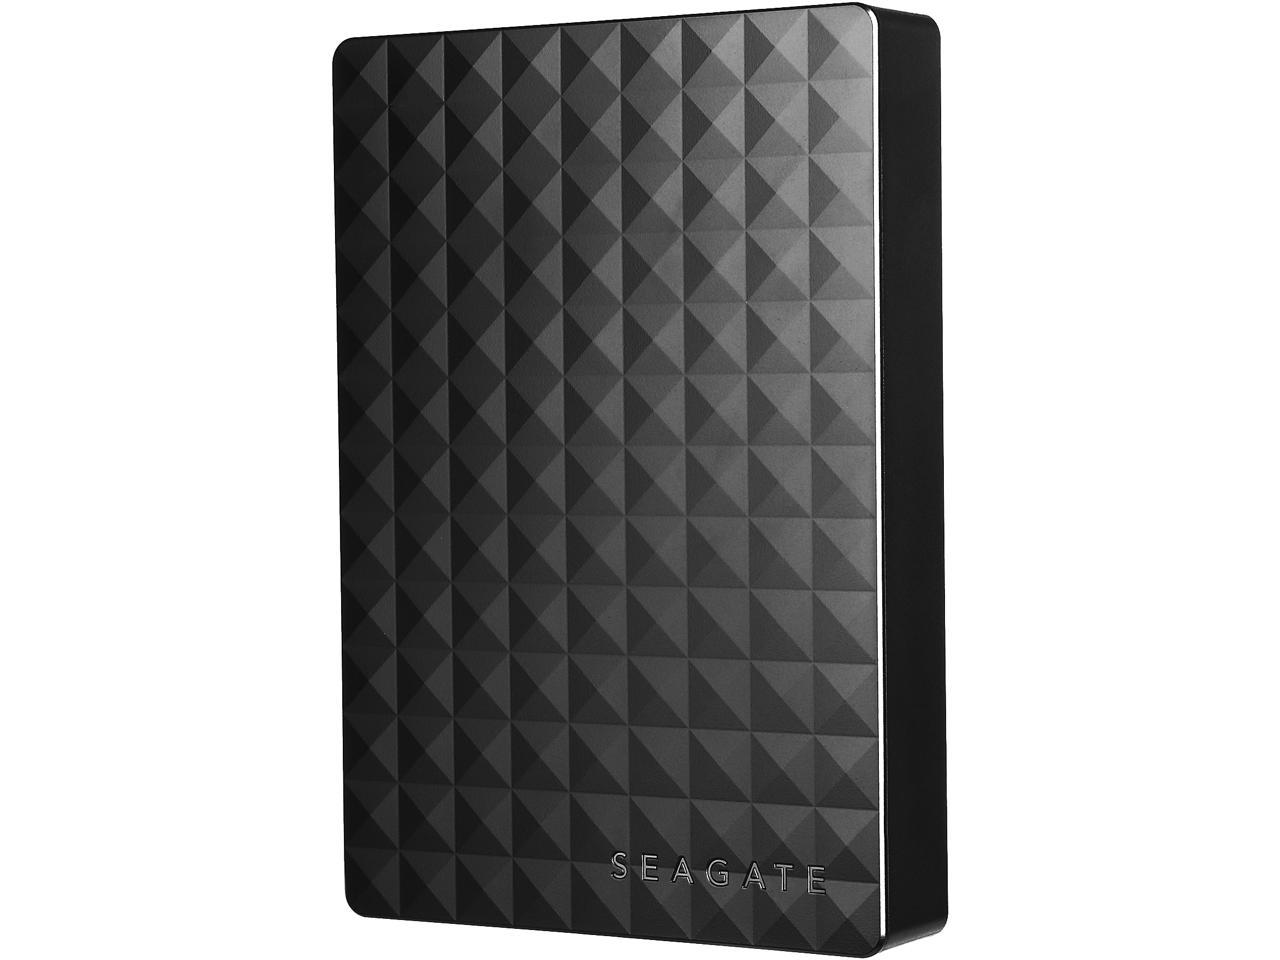 Seagate Portable Hard Drive 5Tb Hdd - External Expansion For Pc Windows Ps4 & Xbox - Usb 2.0 & 3.0 Black (Stea5000402)